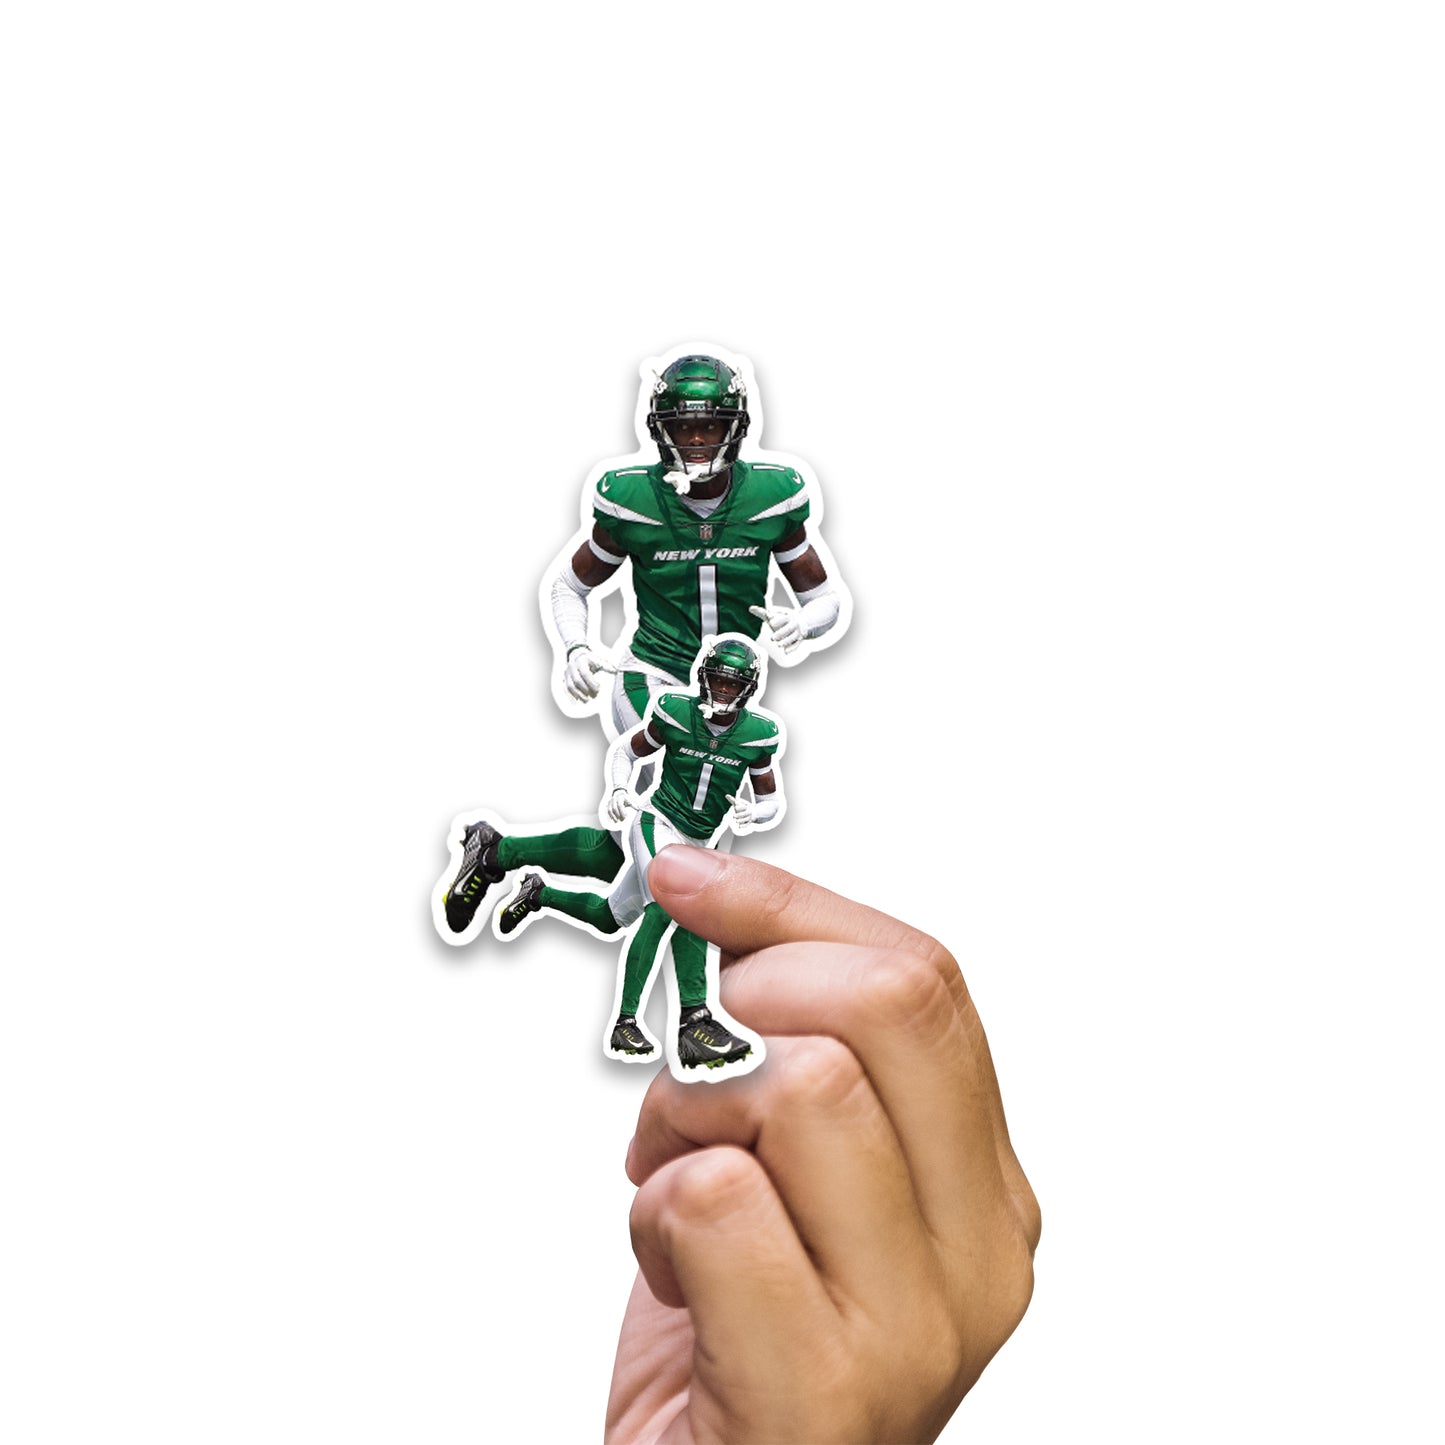 New York Jets: Sauce Gardner  Minis        - Officially Licensed NFL Removable     Adhesive Decal